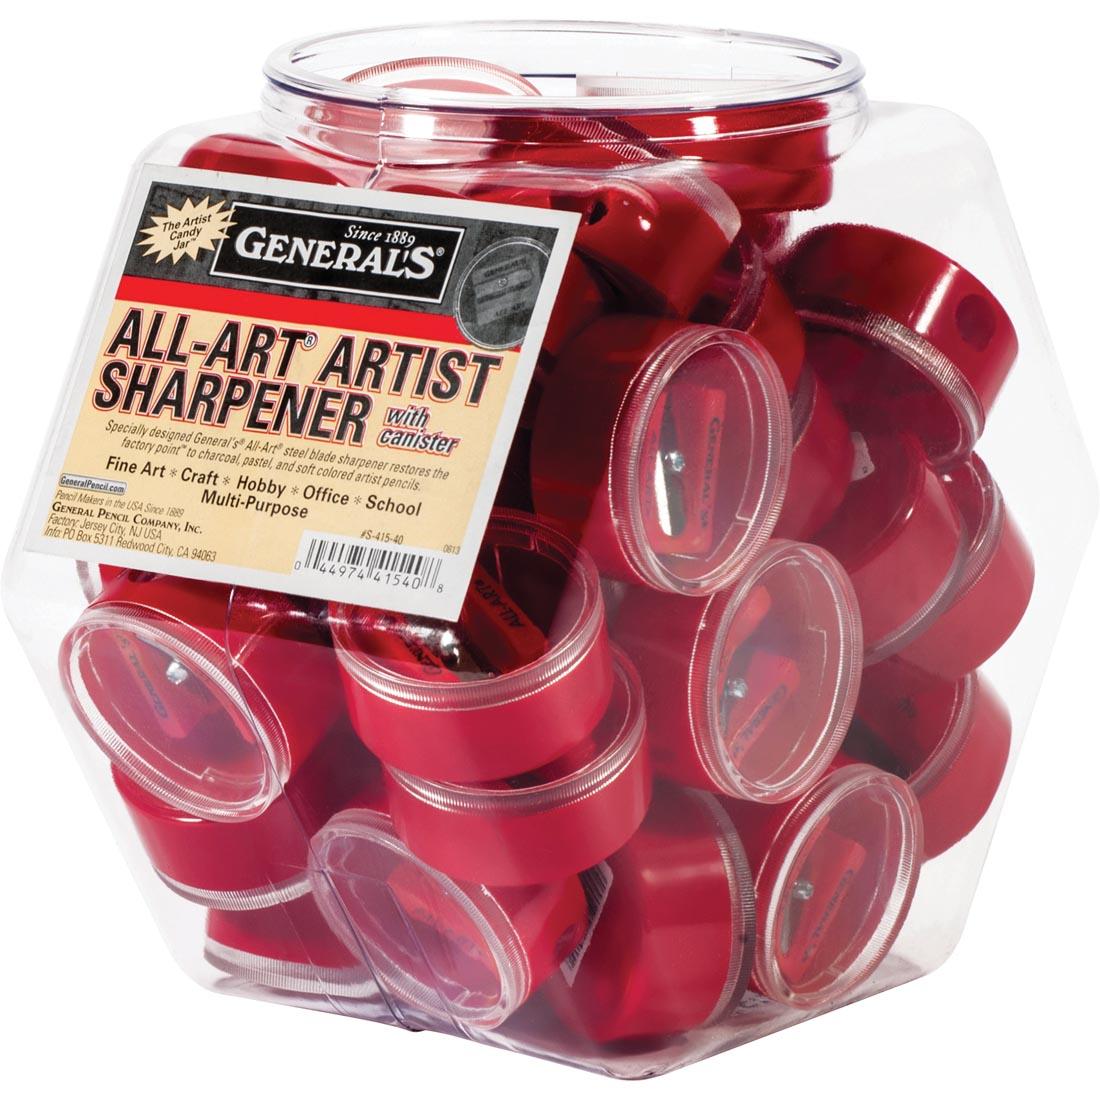 General's Little Red All-Art Canister Pencil Sharpeners Tub